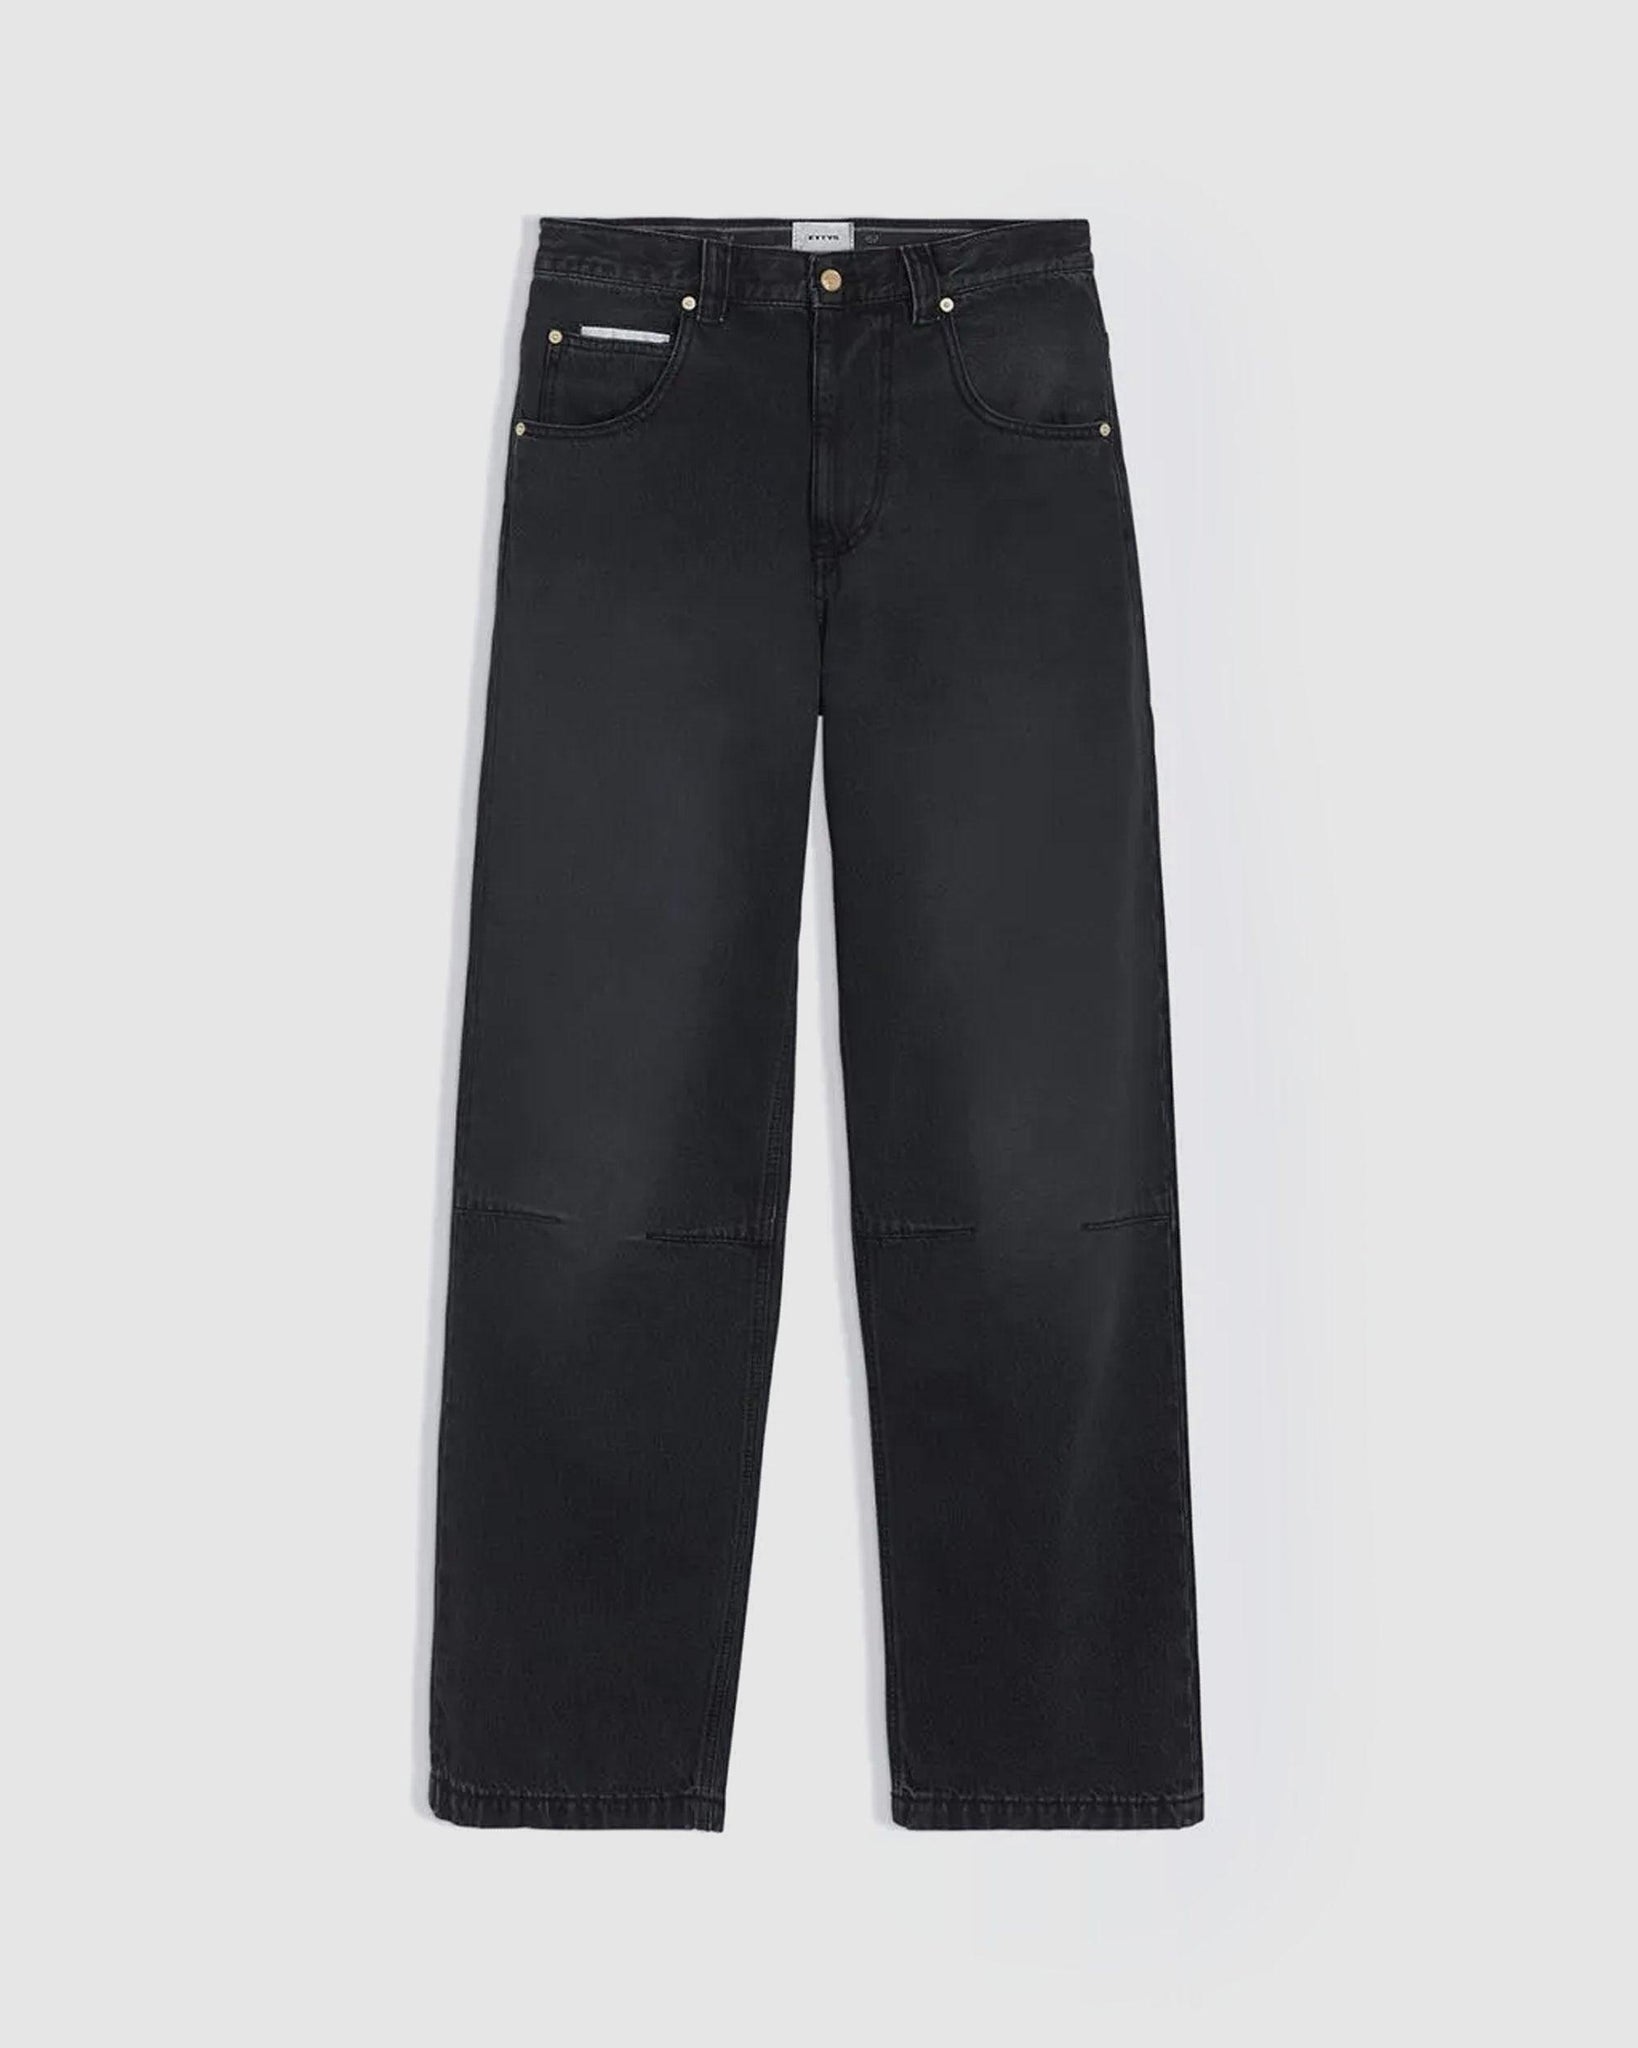 Titan Stone Black Jeans - {{ collection.title }} - Chinatown Country Club 